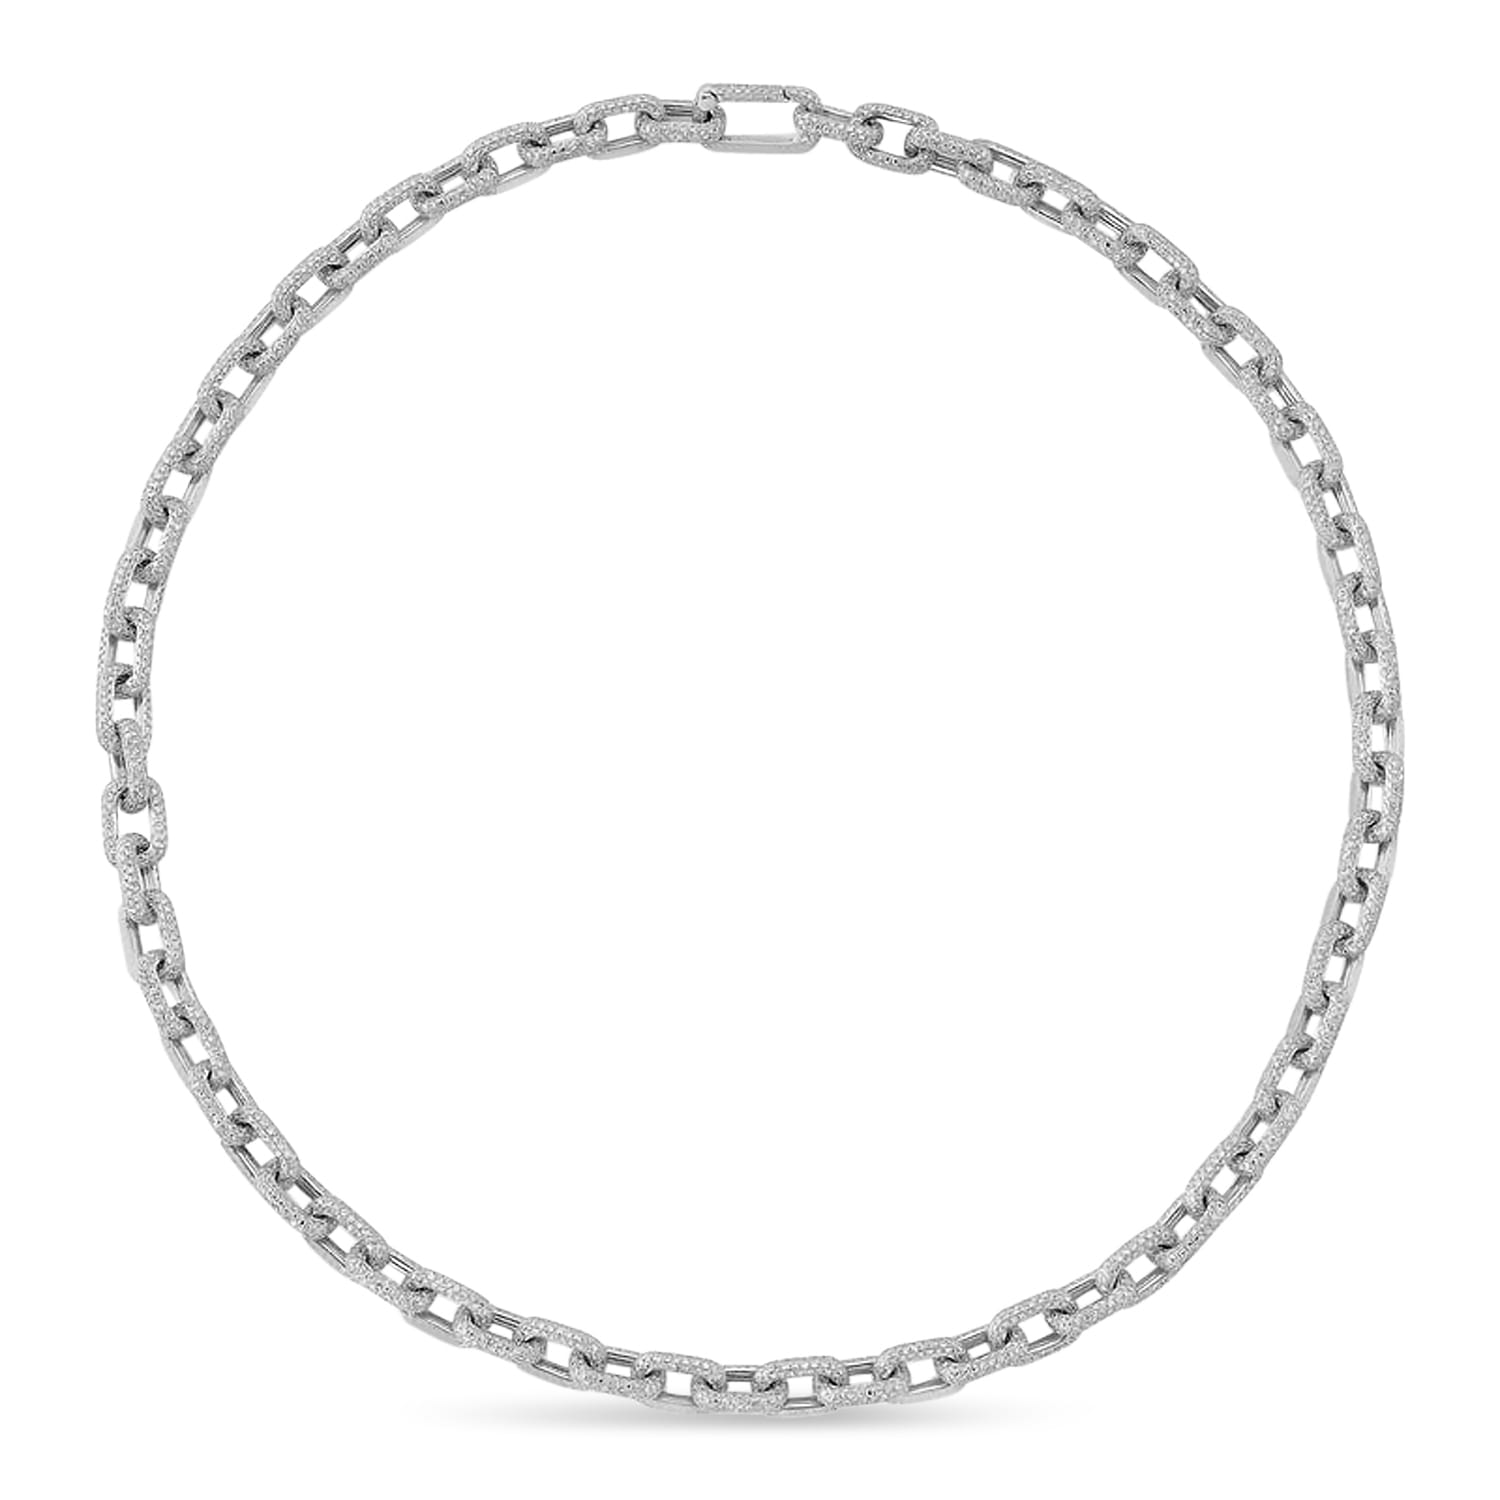 Diamond Pave Link Chain Necklace 14k White Gold (19.30ct)